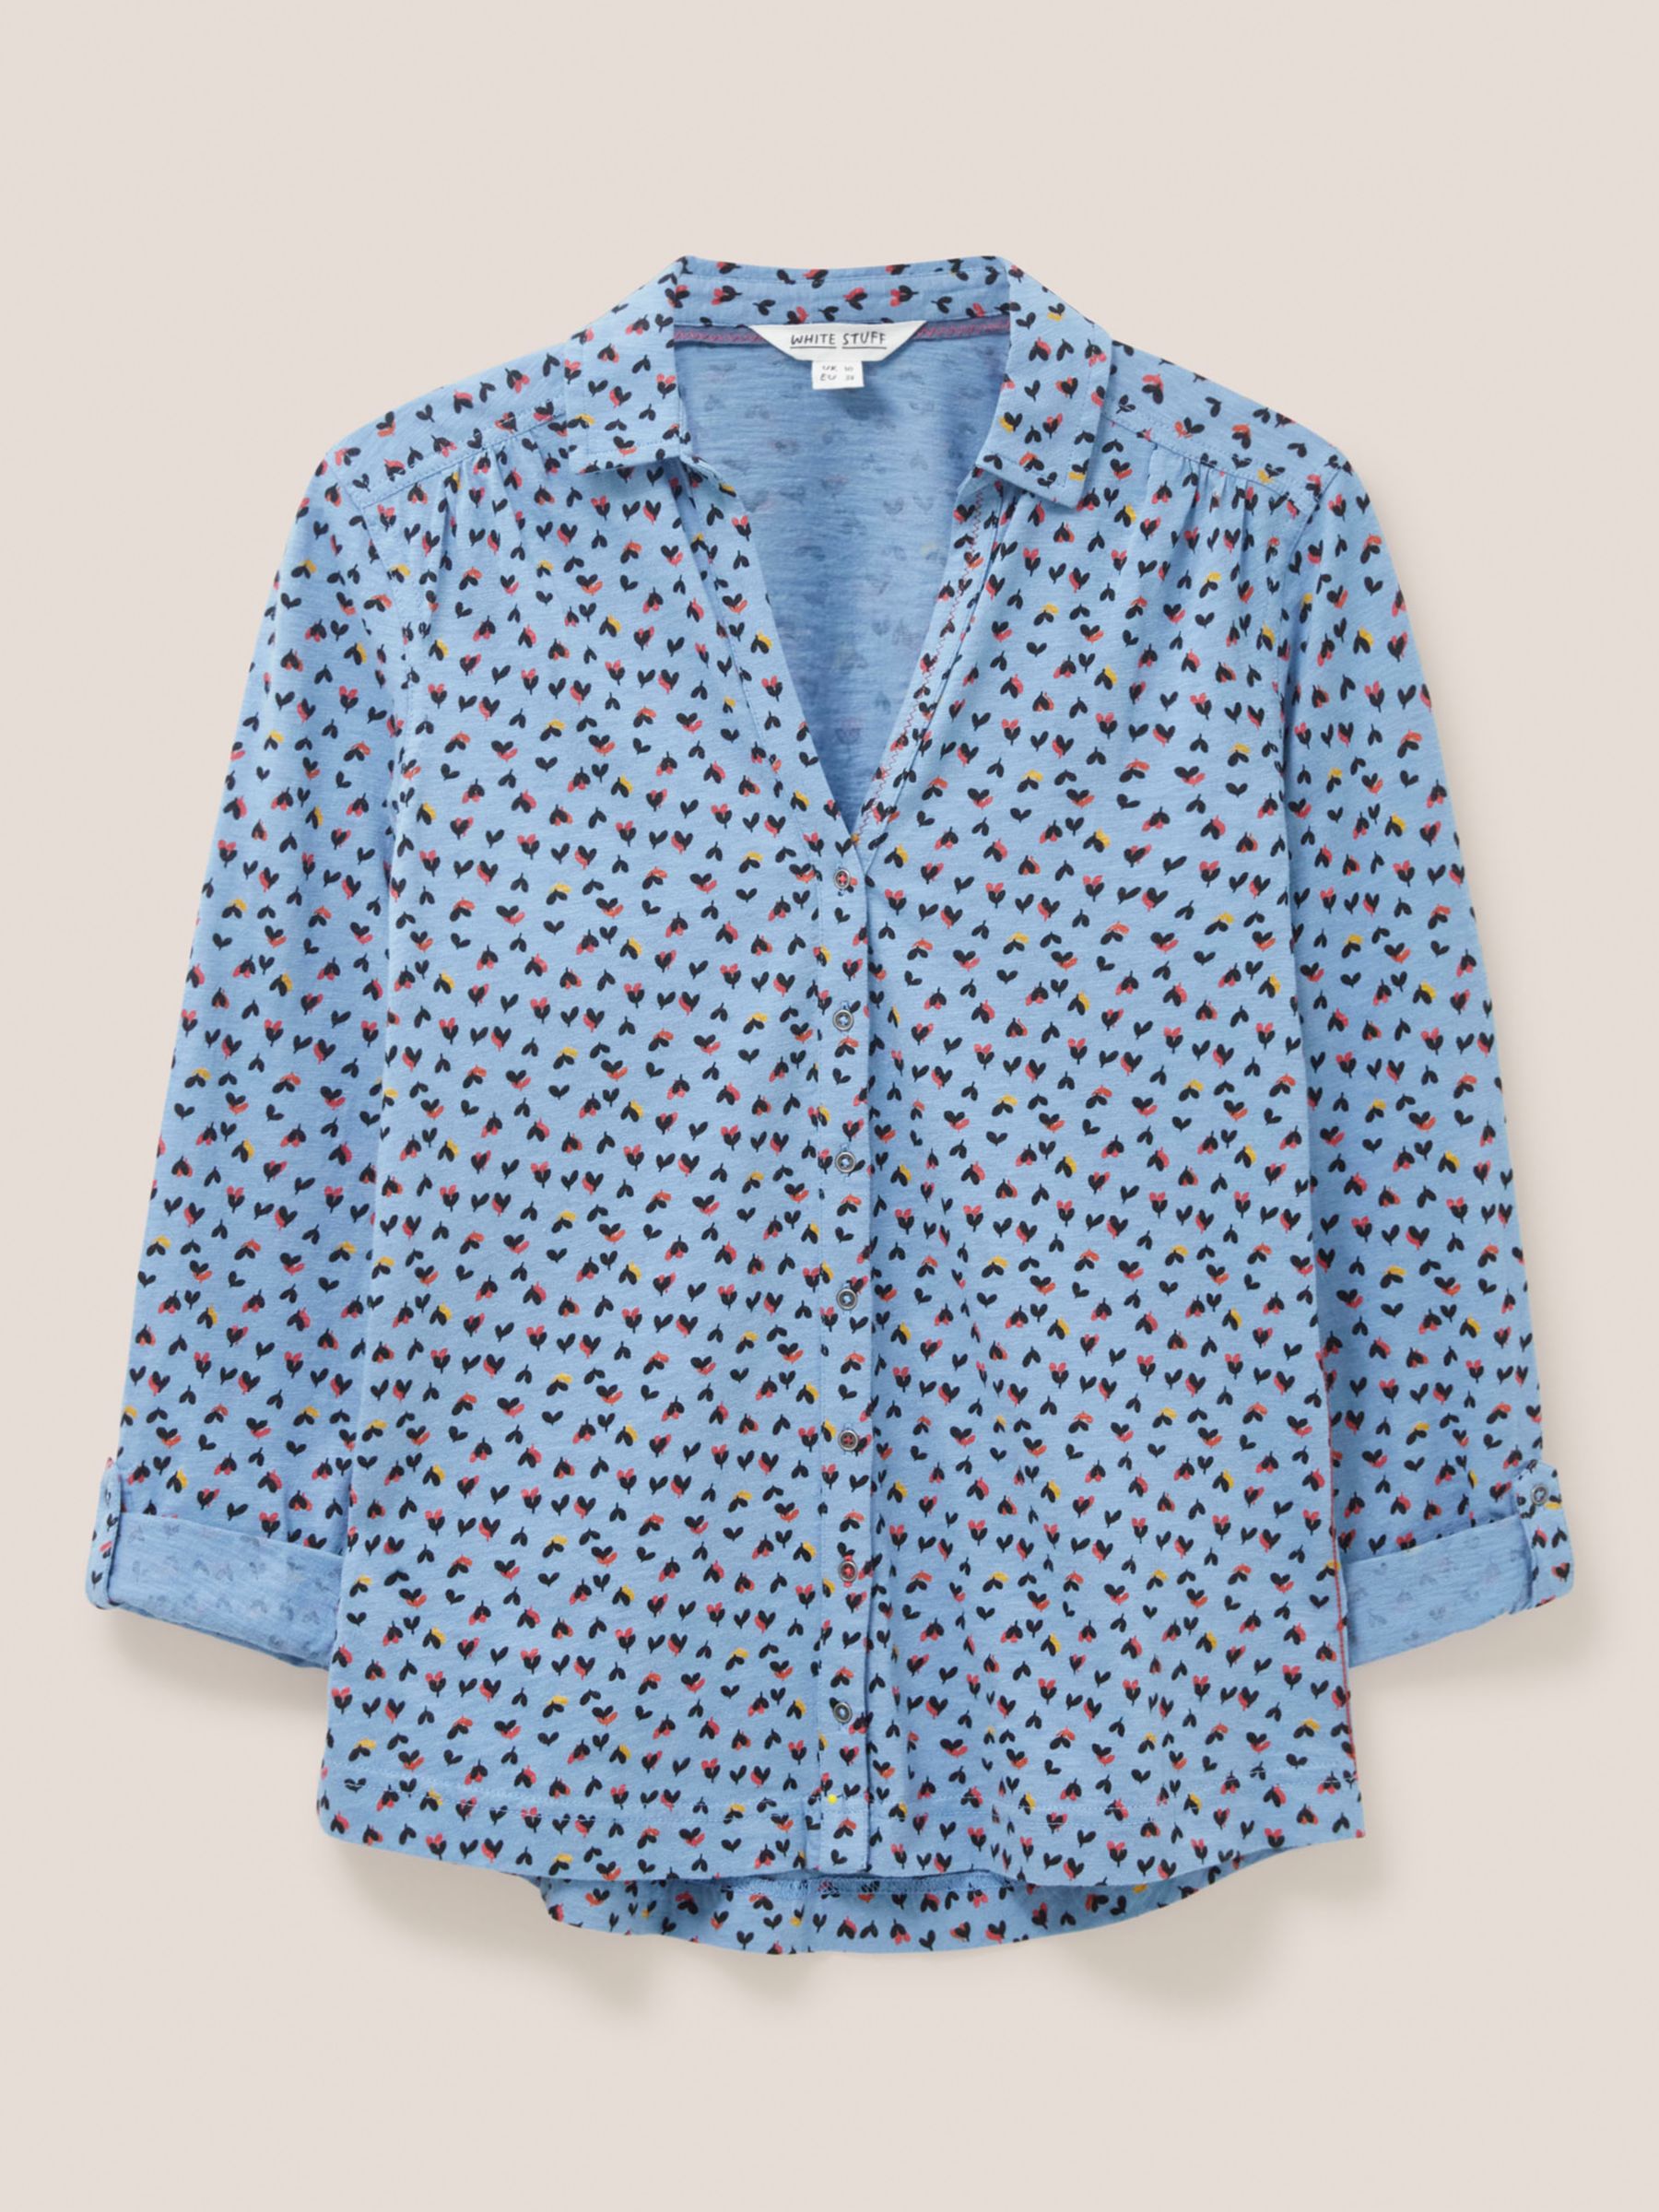 Buy White Stuff Annie Jersey Print Shirt, Teal/Multi Online at johnlewis.com